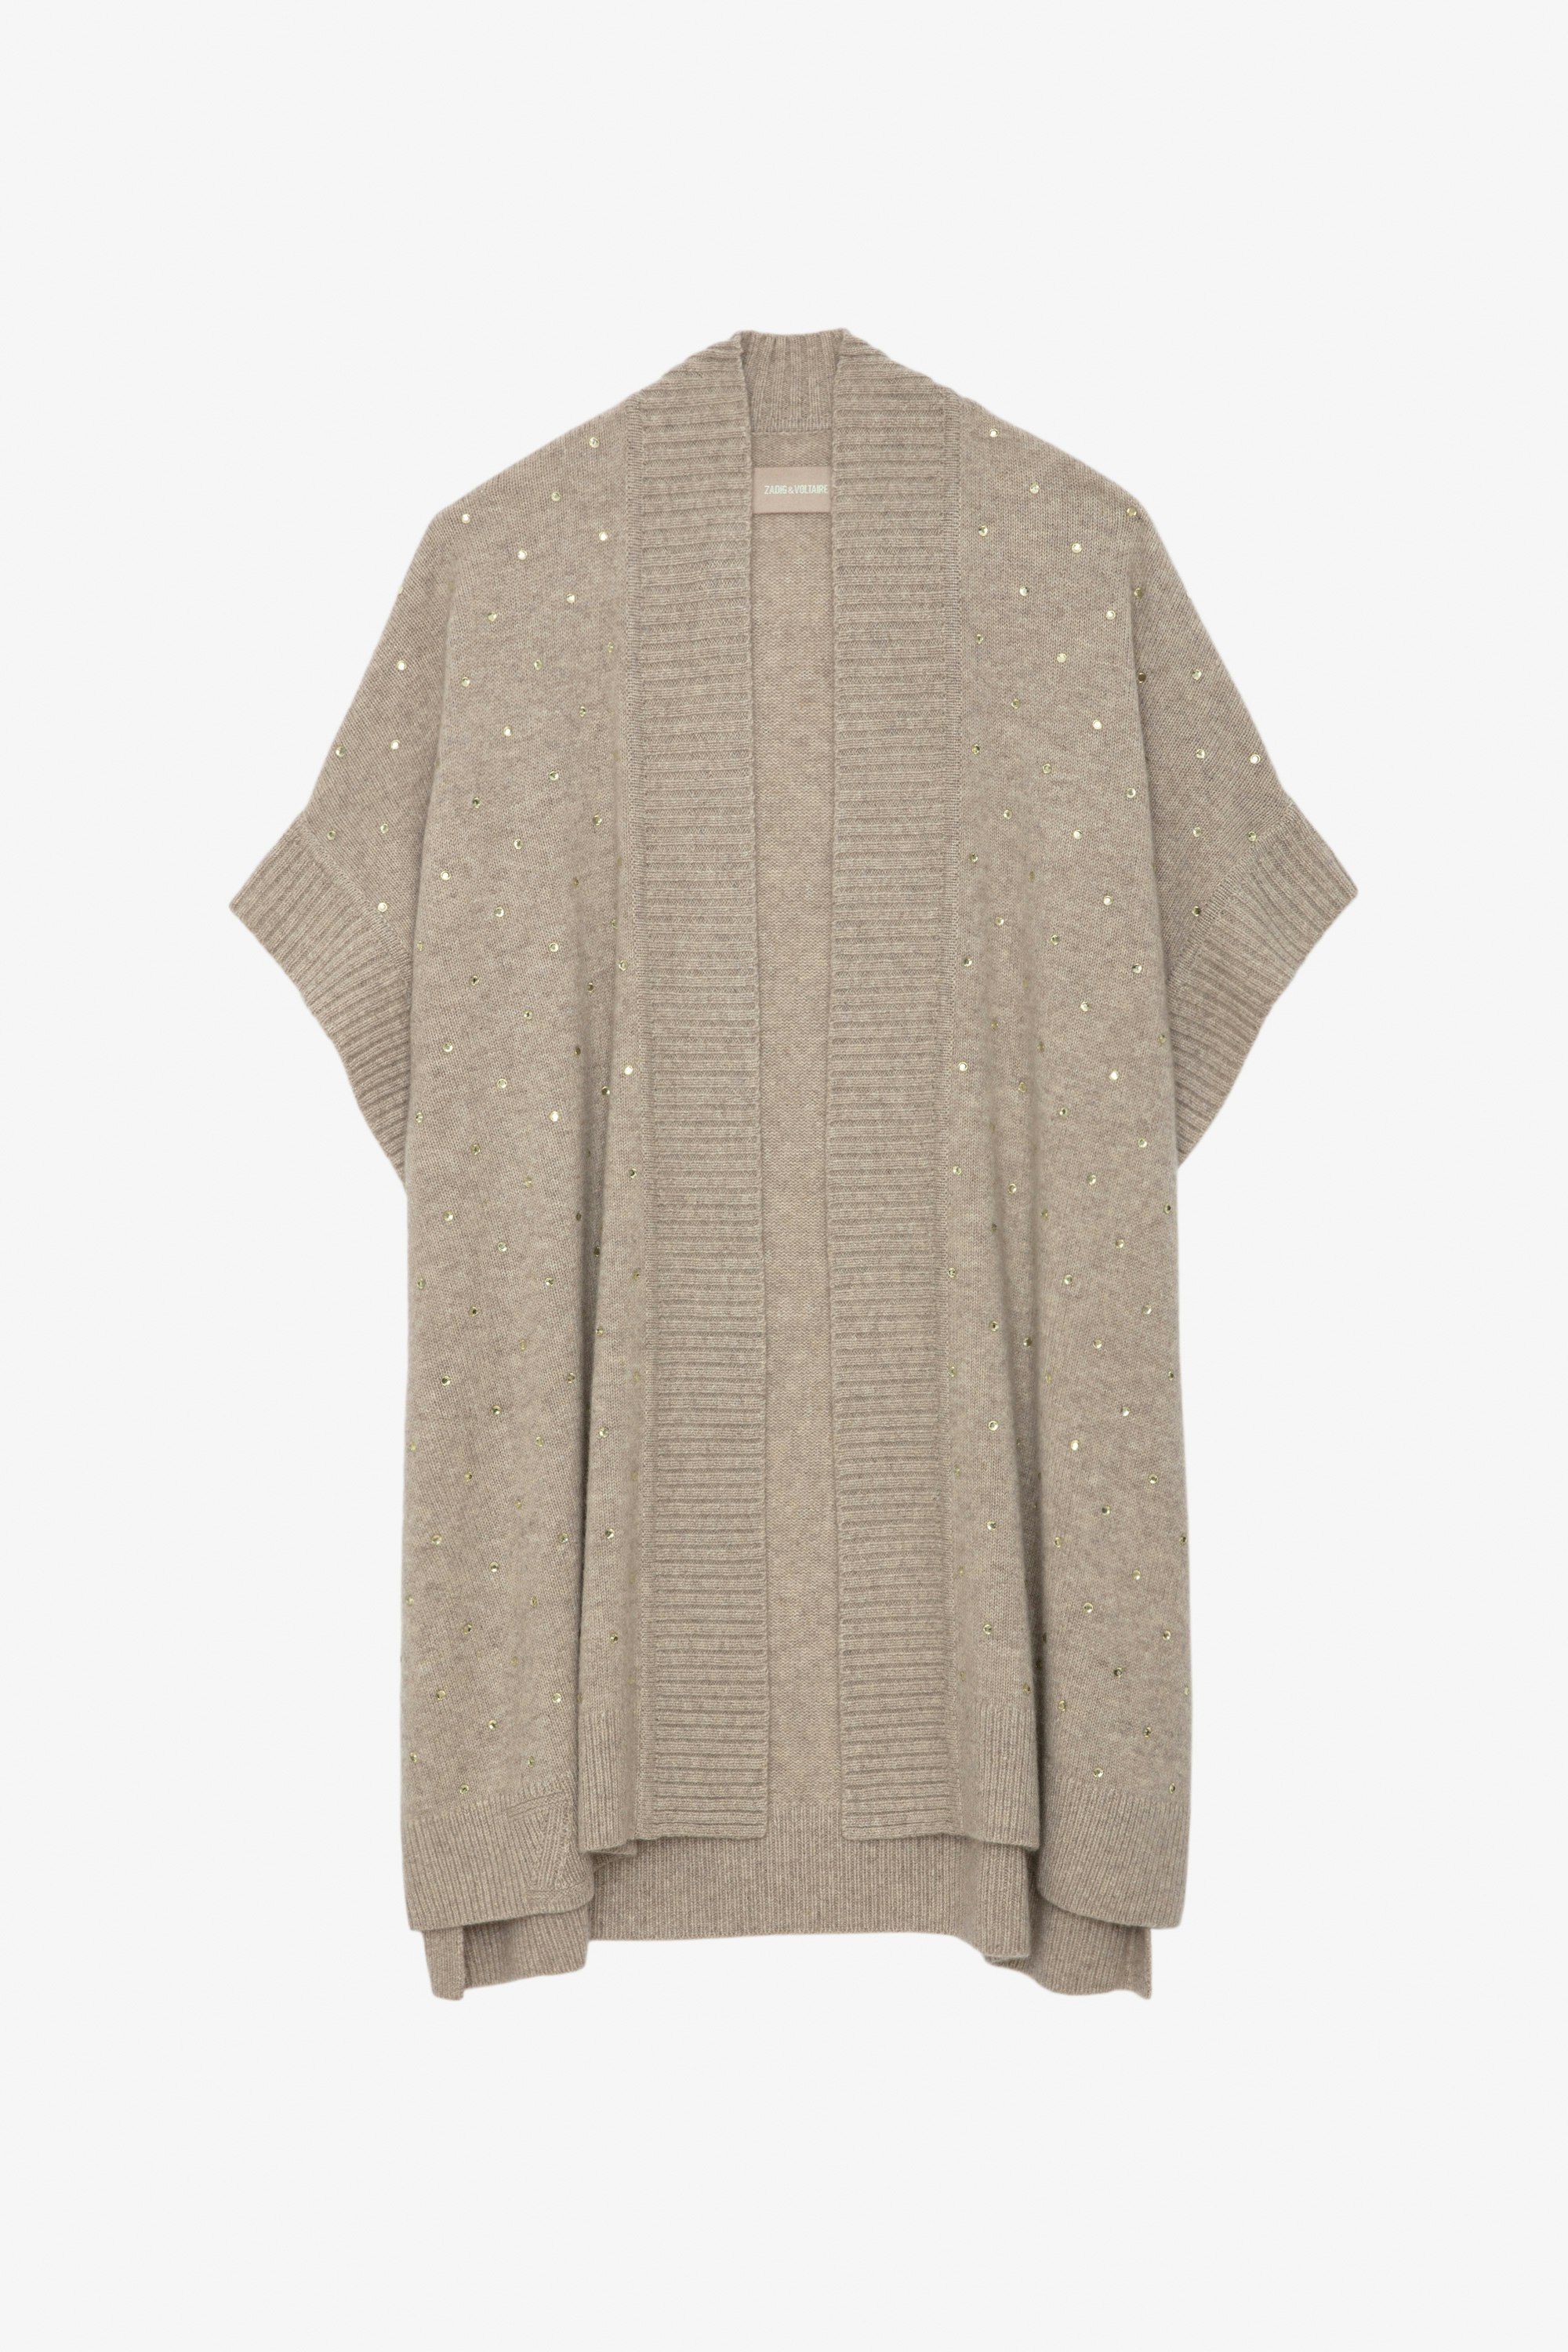 Indiany Cashmere Cardigan - Beige cashmere midi cardicoat with short sleeves and gold diamanté.